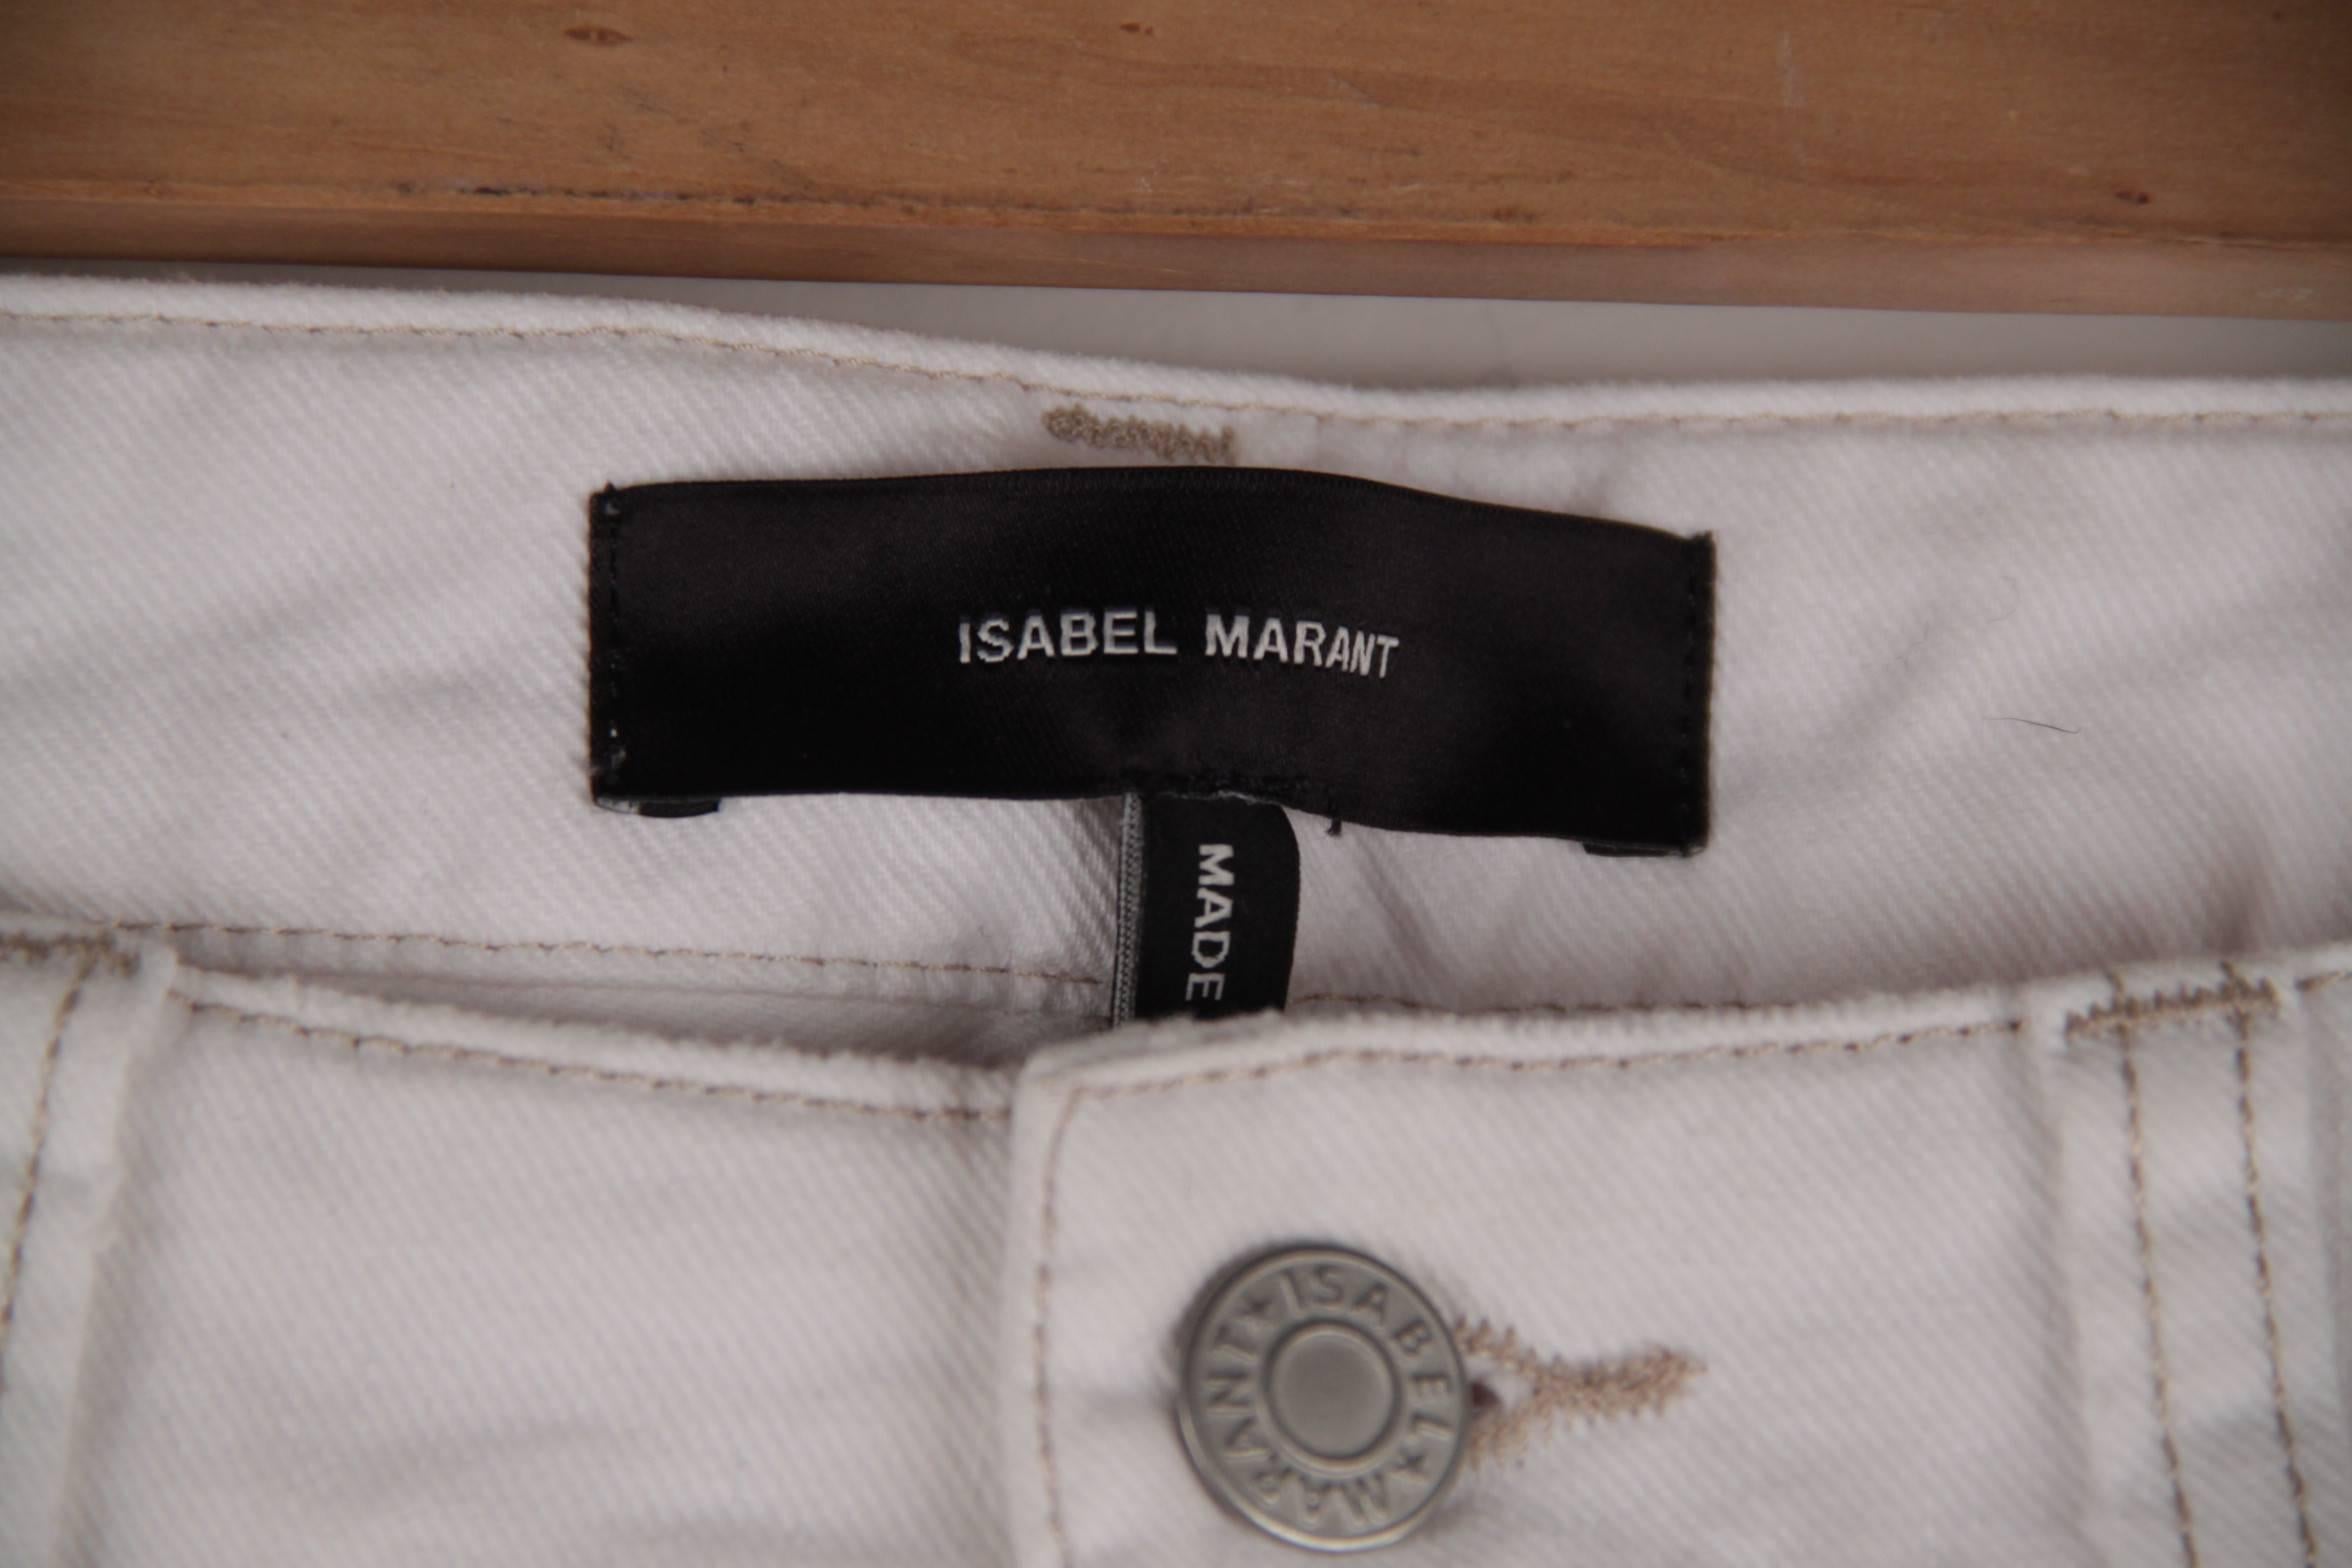 ISABEL MARANT White EMBROIDERED Cotton CROPPED Skinny JEANS Pants Sz 38  1